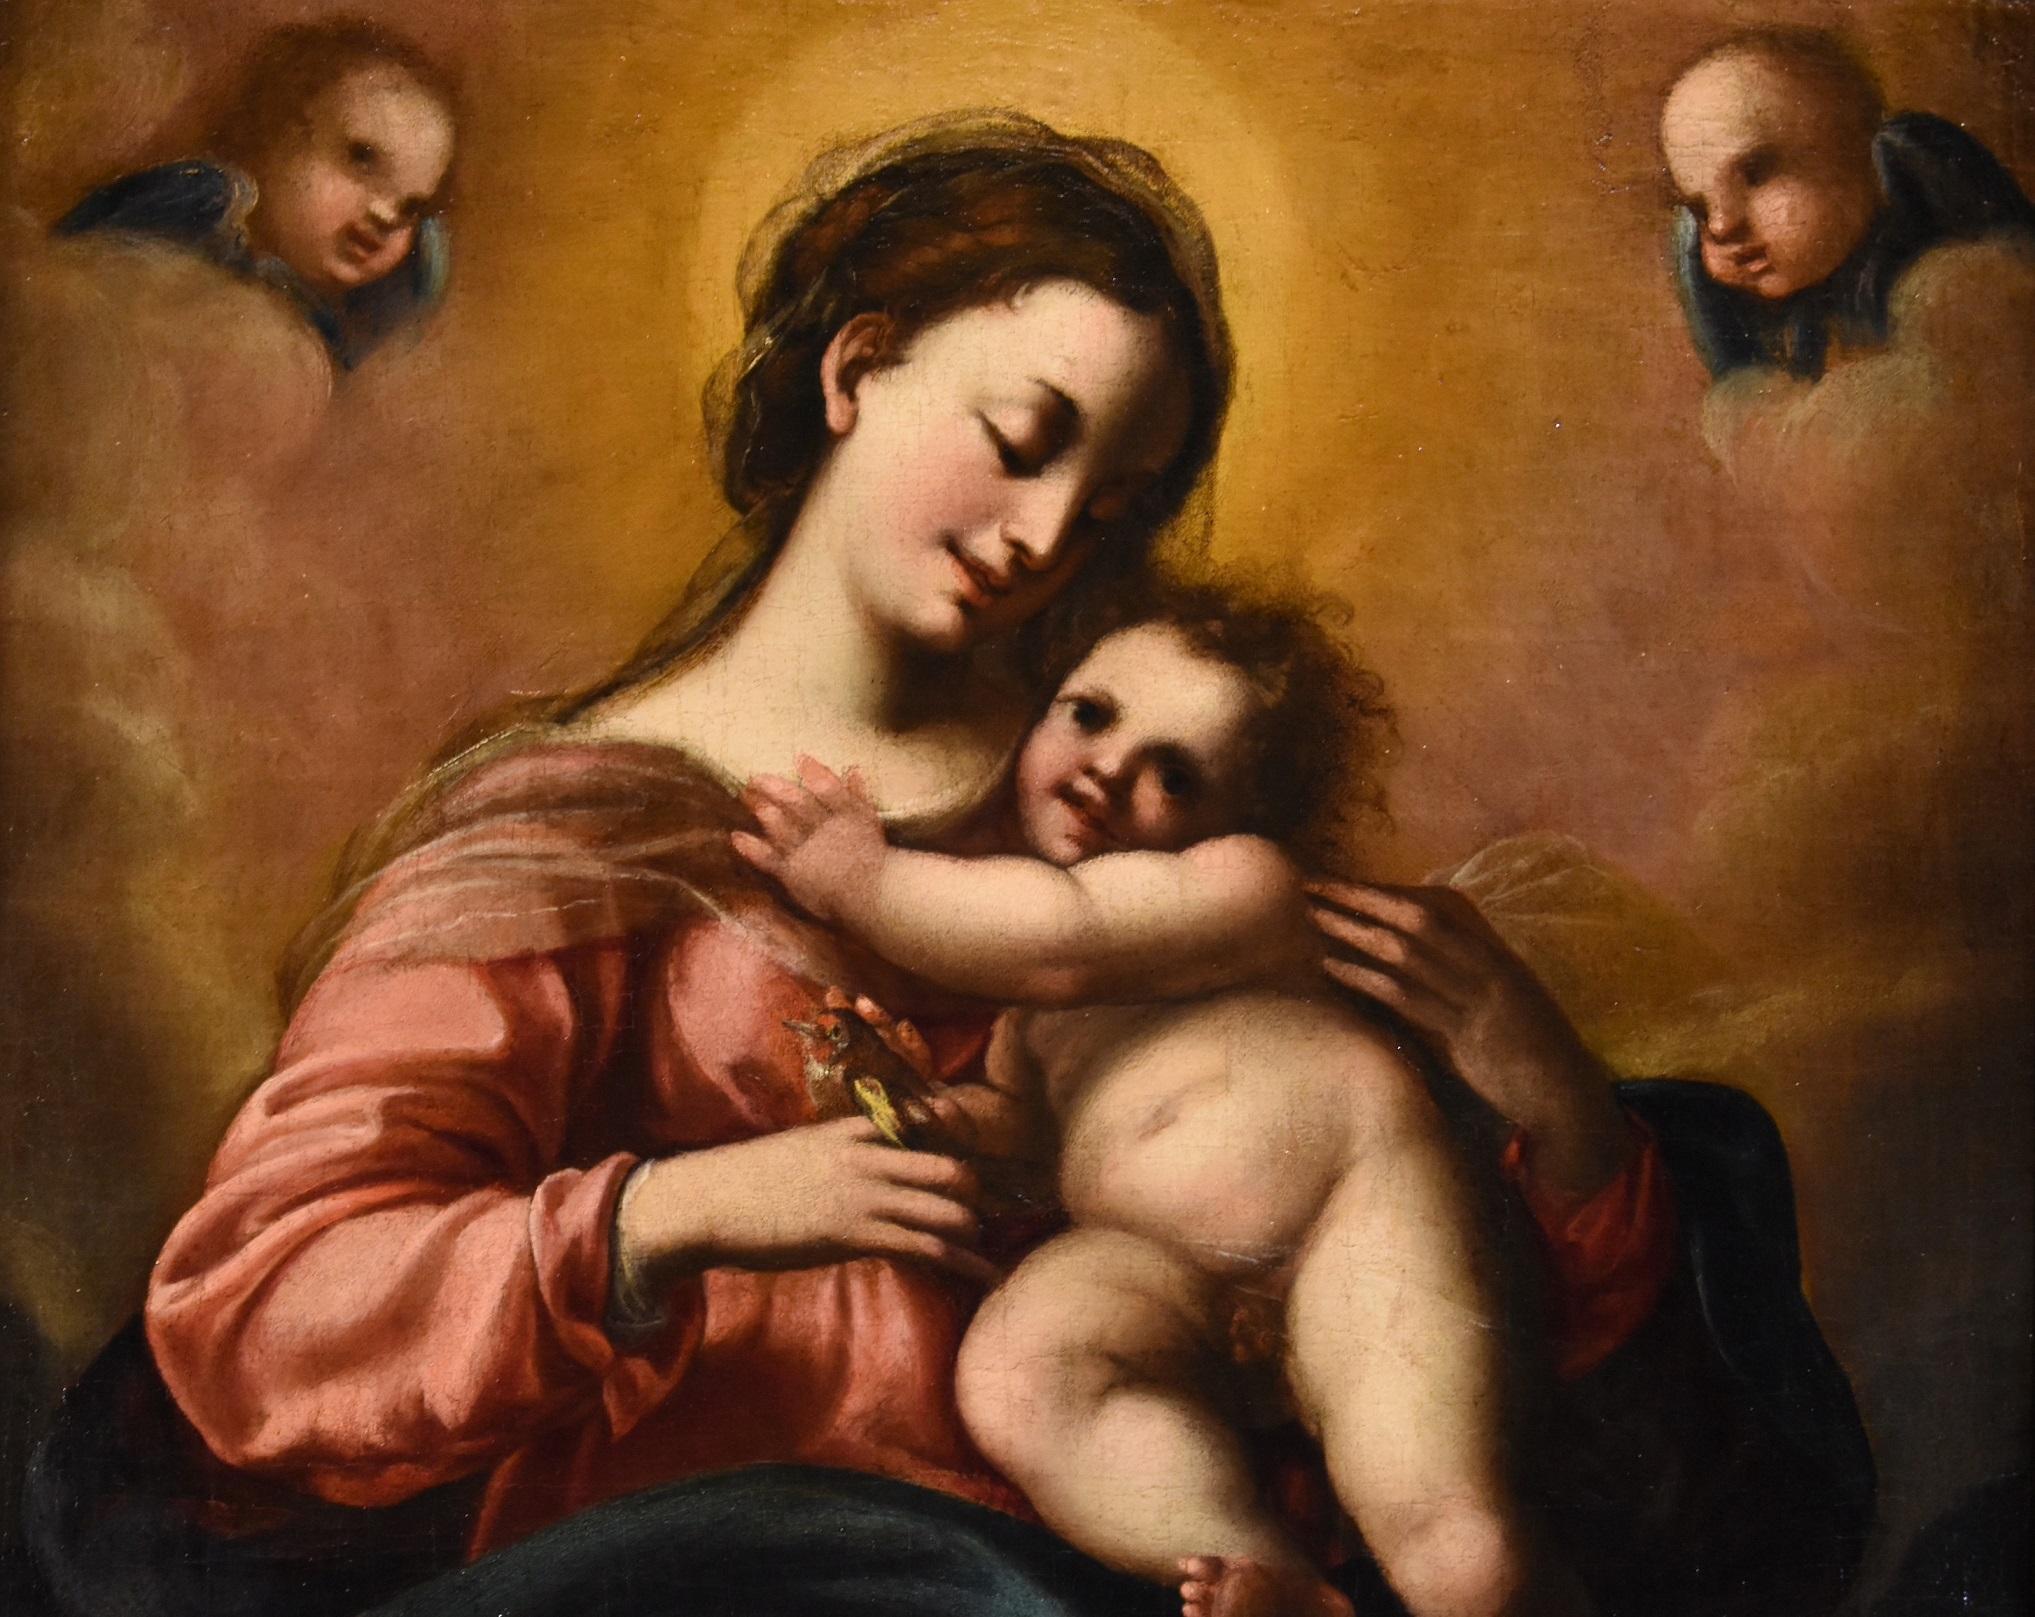 Confortini Mary Madonna Angels Paint Oil on canvas Old master 17th Century Italy - Old Masters Painting by Jacopo Confortini (Florence 1602-1672)